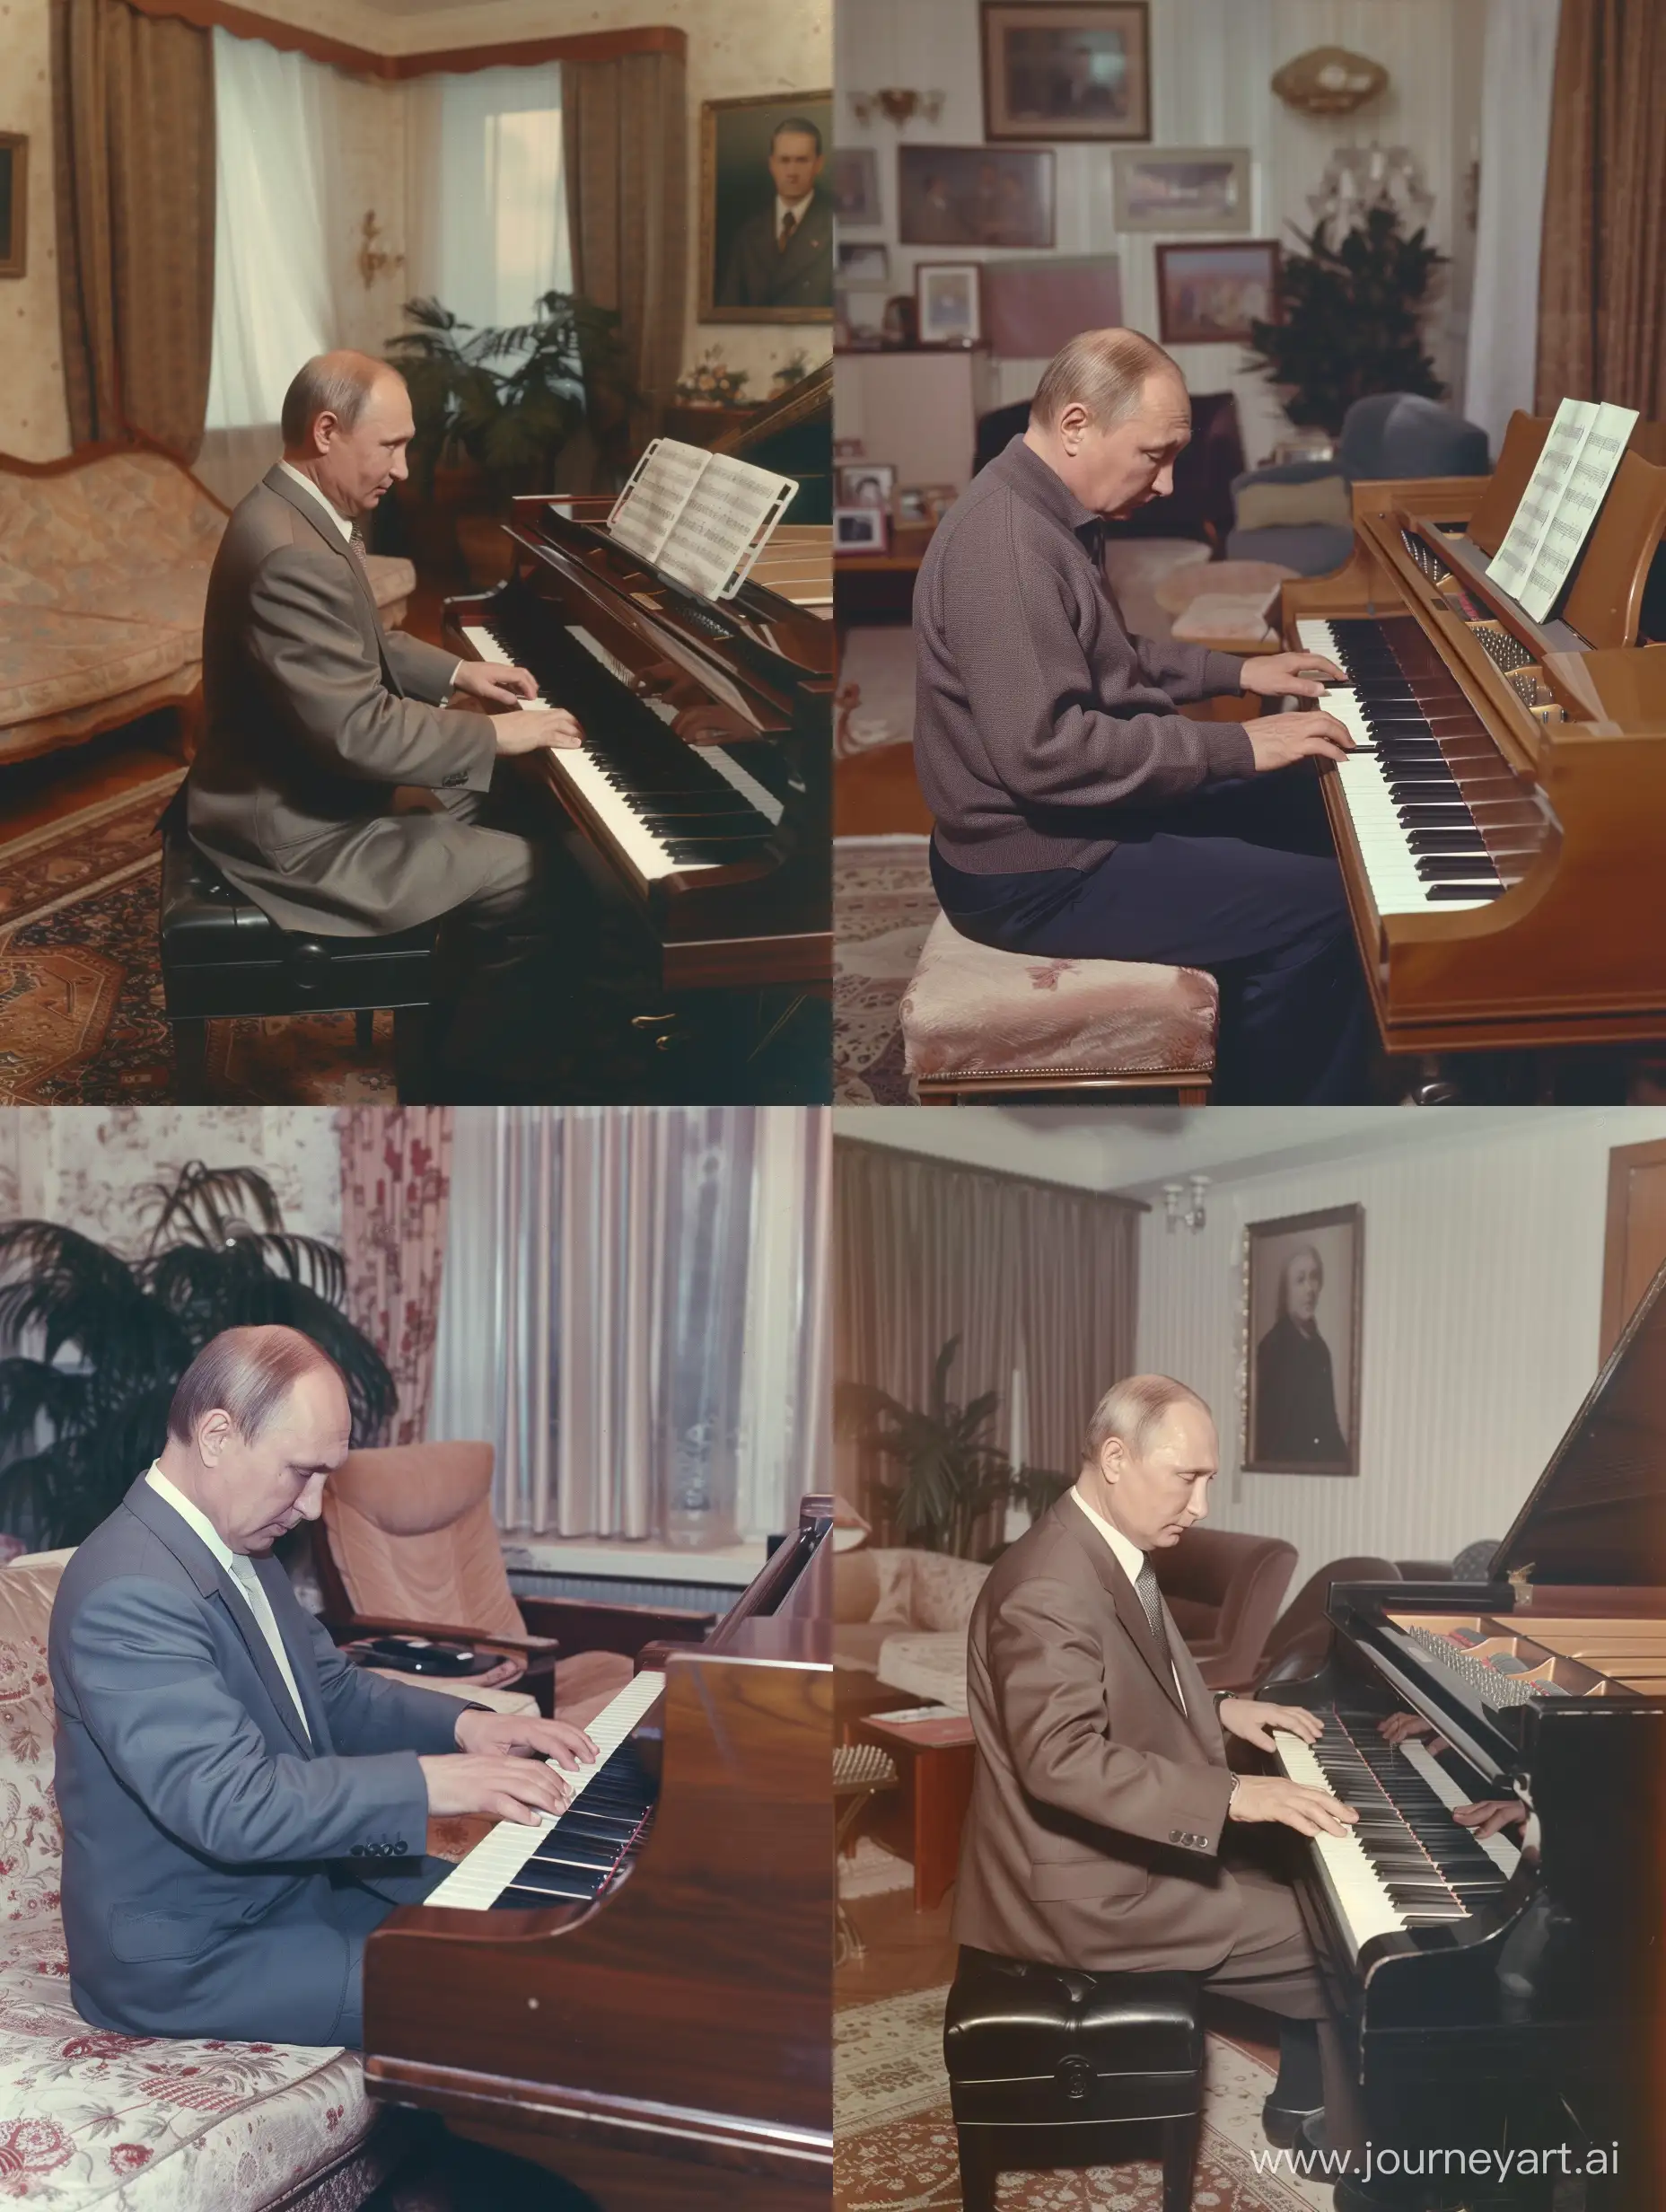 Full Color Candid Photo 1985, Phone photo of Vladimir Putin playing piano in a living room. He is facing the camera/ viewer. The photo was posted in 2018 on Reddit.